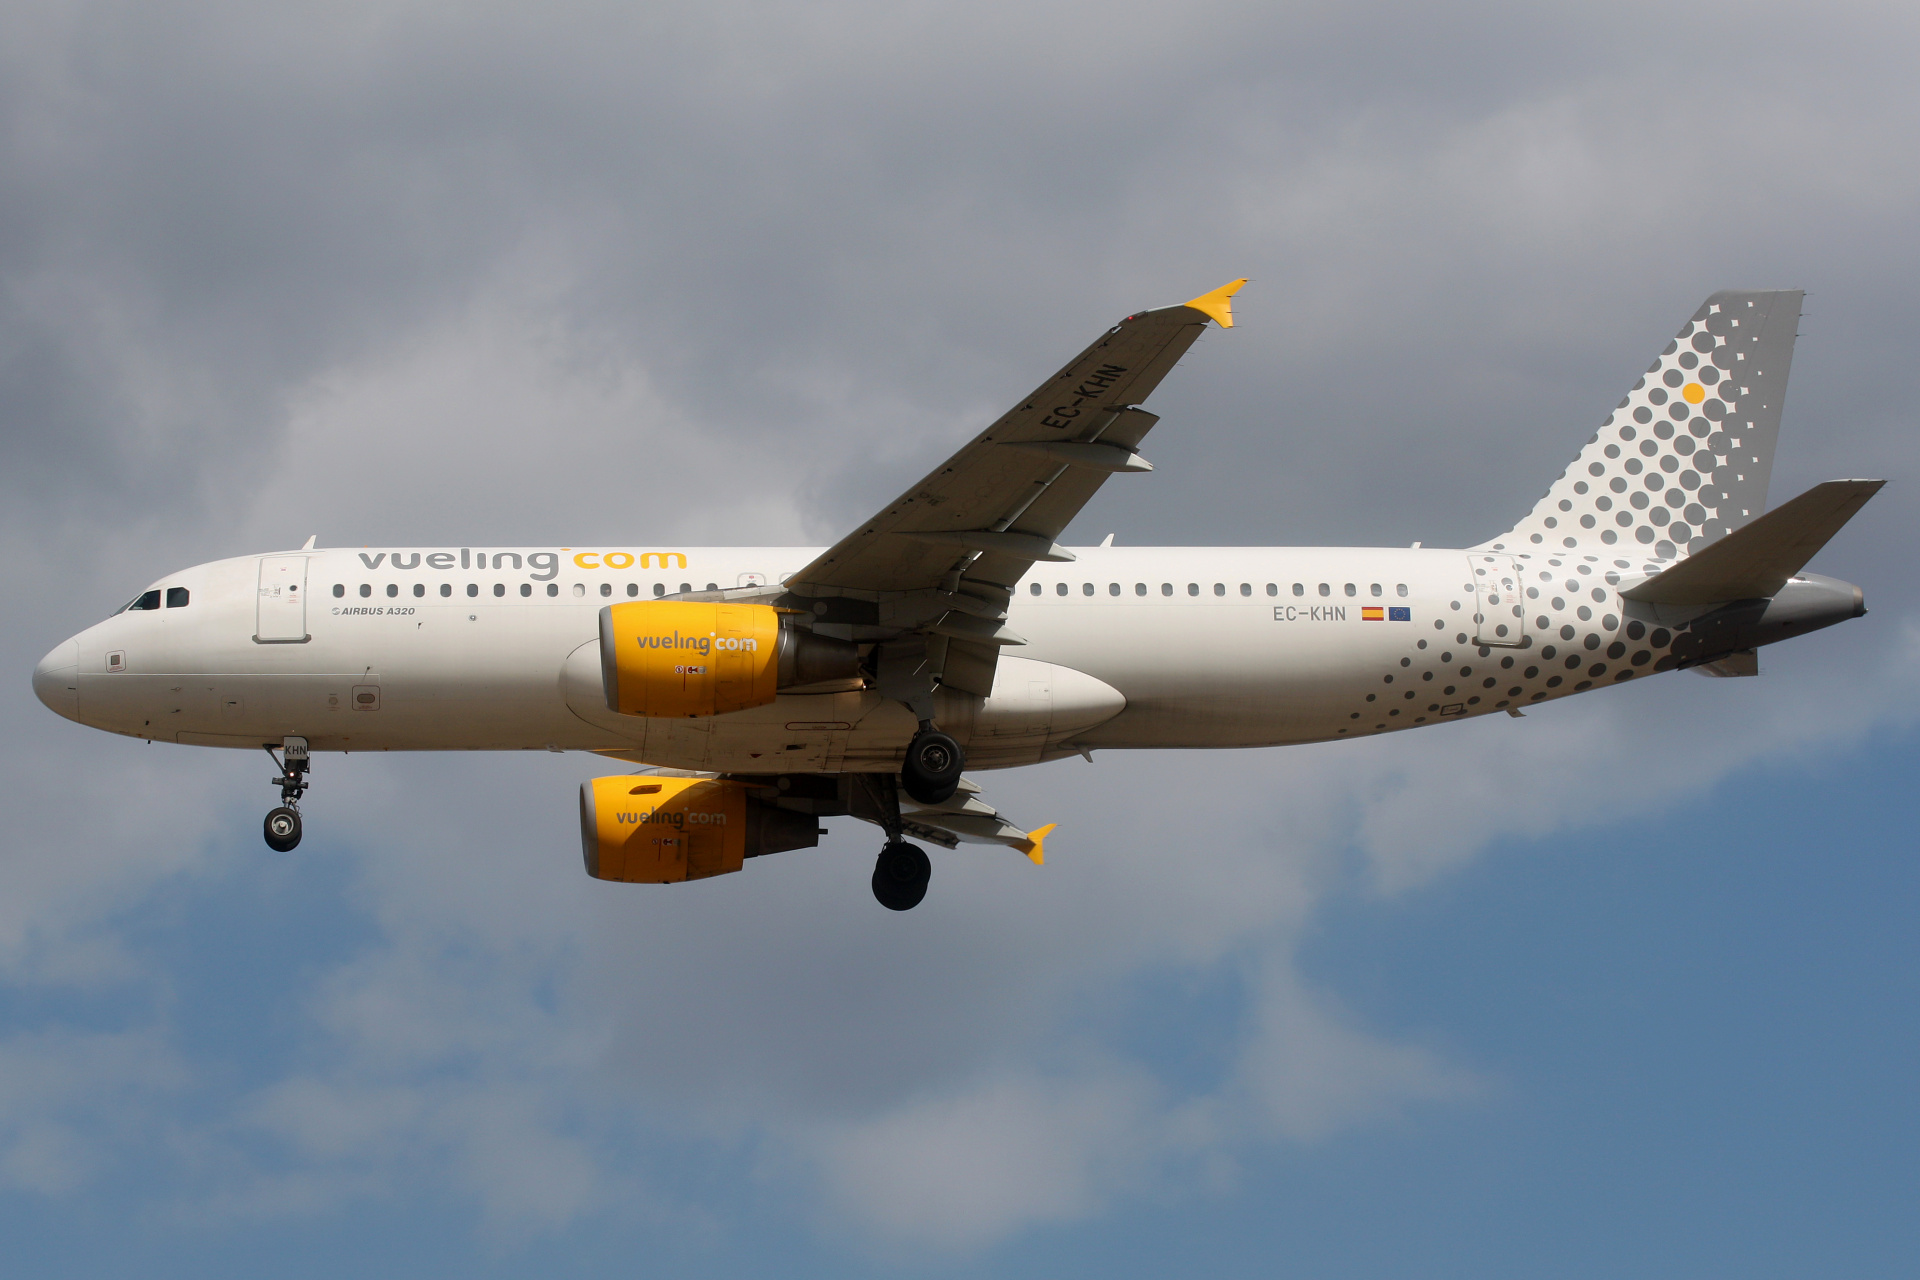 EC-KHN (Aircraft » EPWA Spotting » Airbus A320-200 » Vueling Airlines)